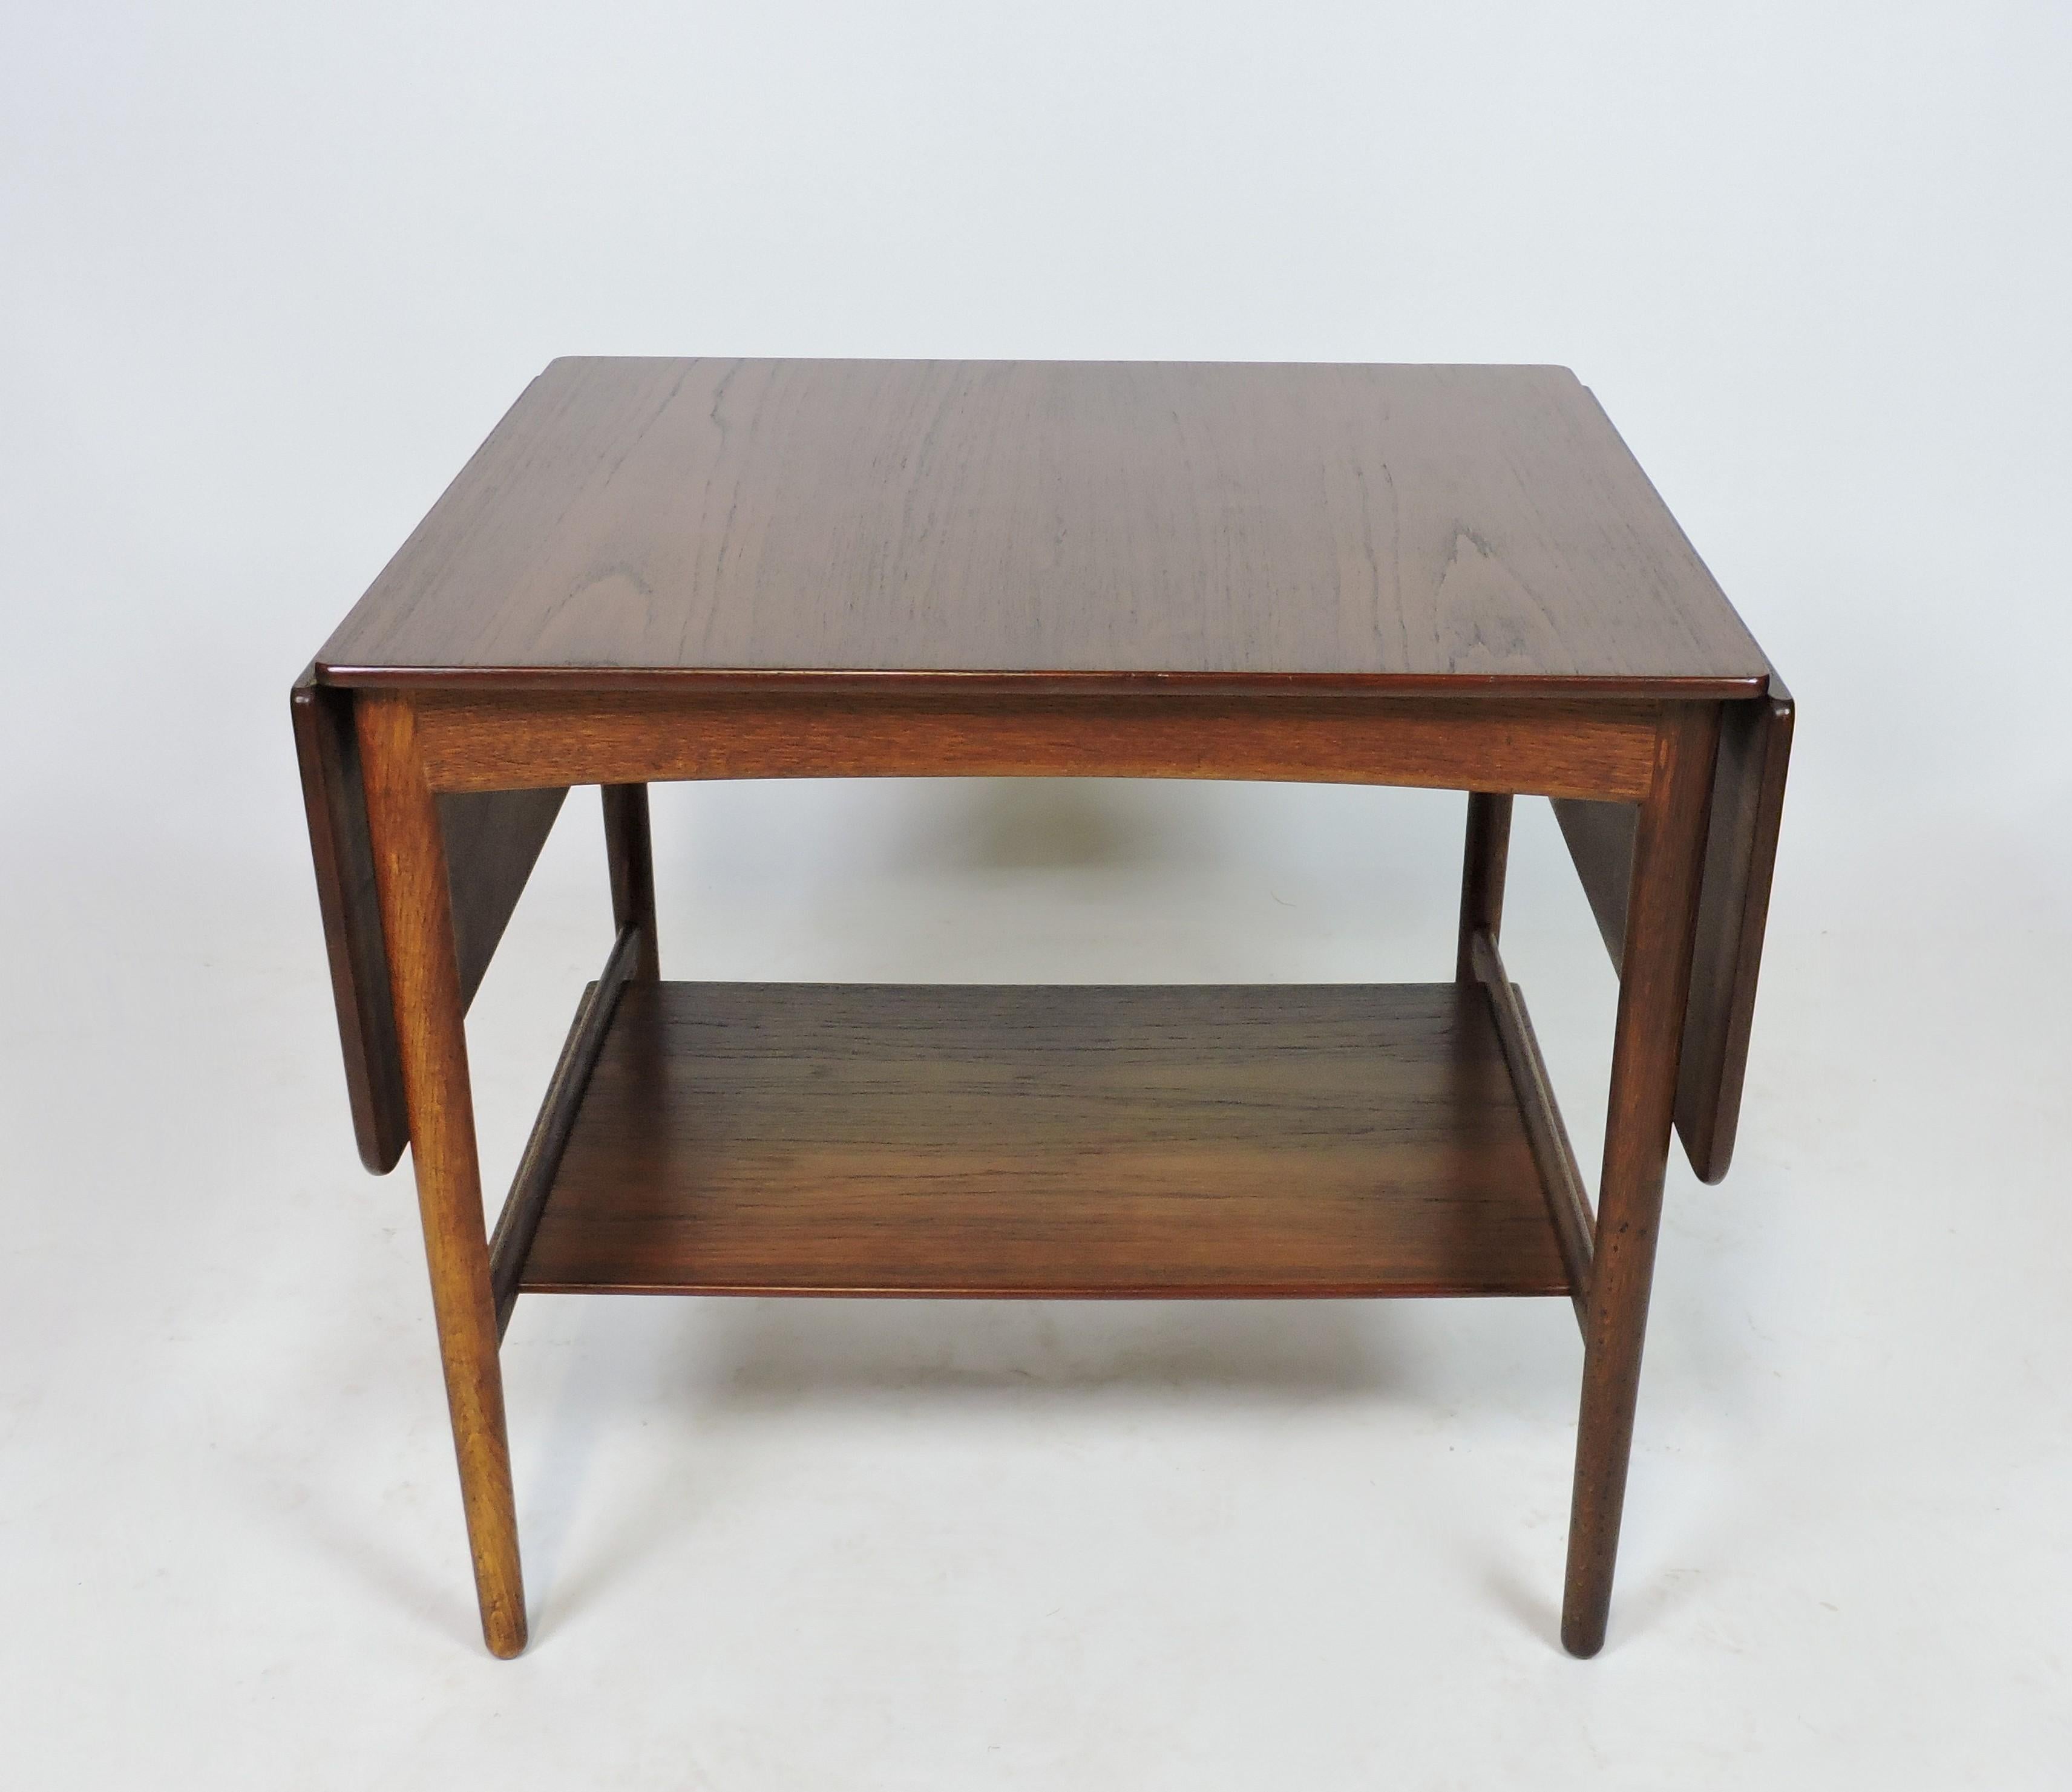 Beautifully crafted early example end or side table designed by Hans Wegner and manufactured in Denmark by cabinet maker, Andreas Tuck. This teak and oak table has two extendable side leaves and a lower shelf. The top extends to a large 47 5/8